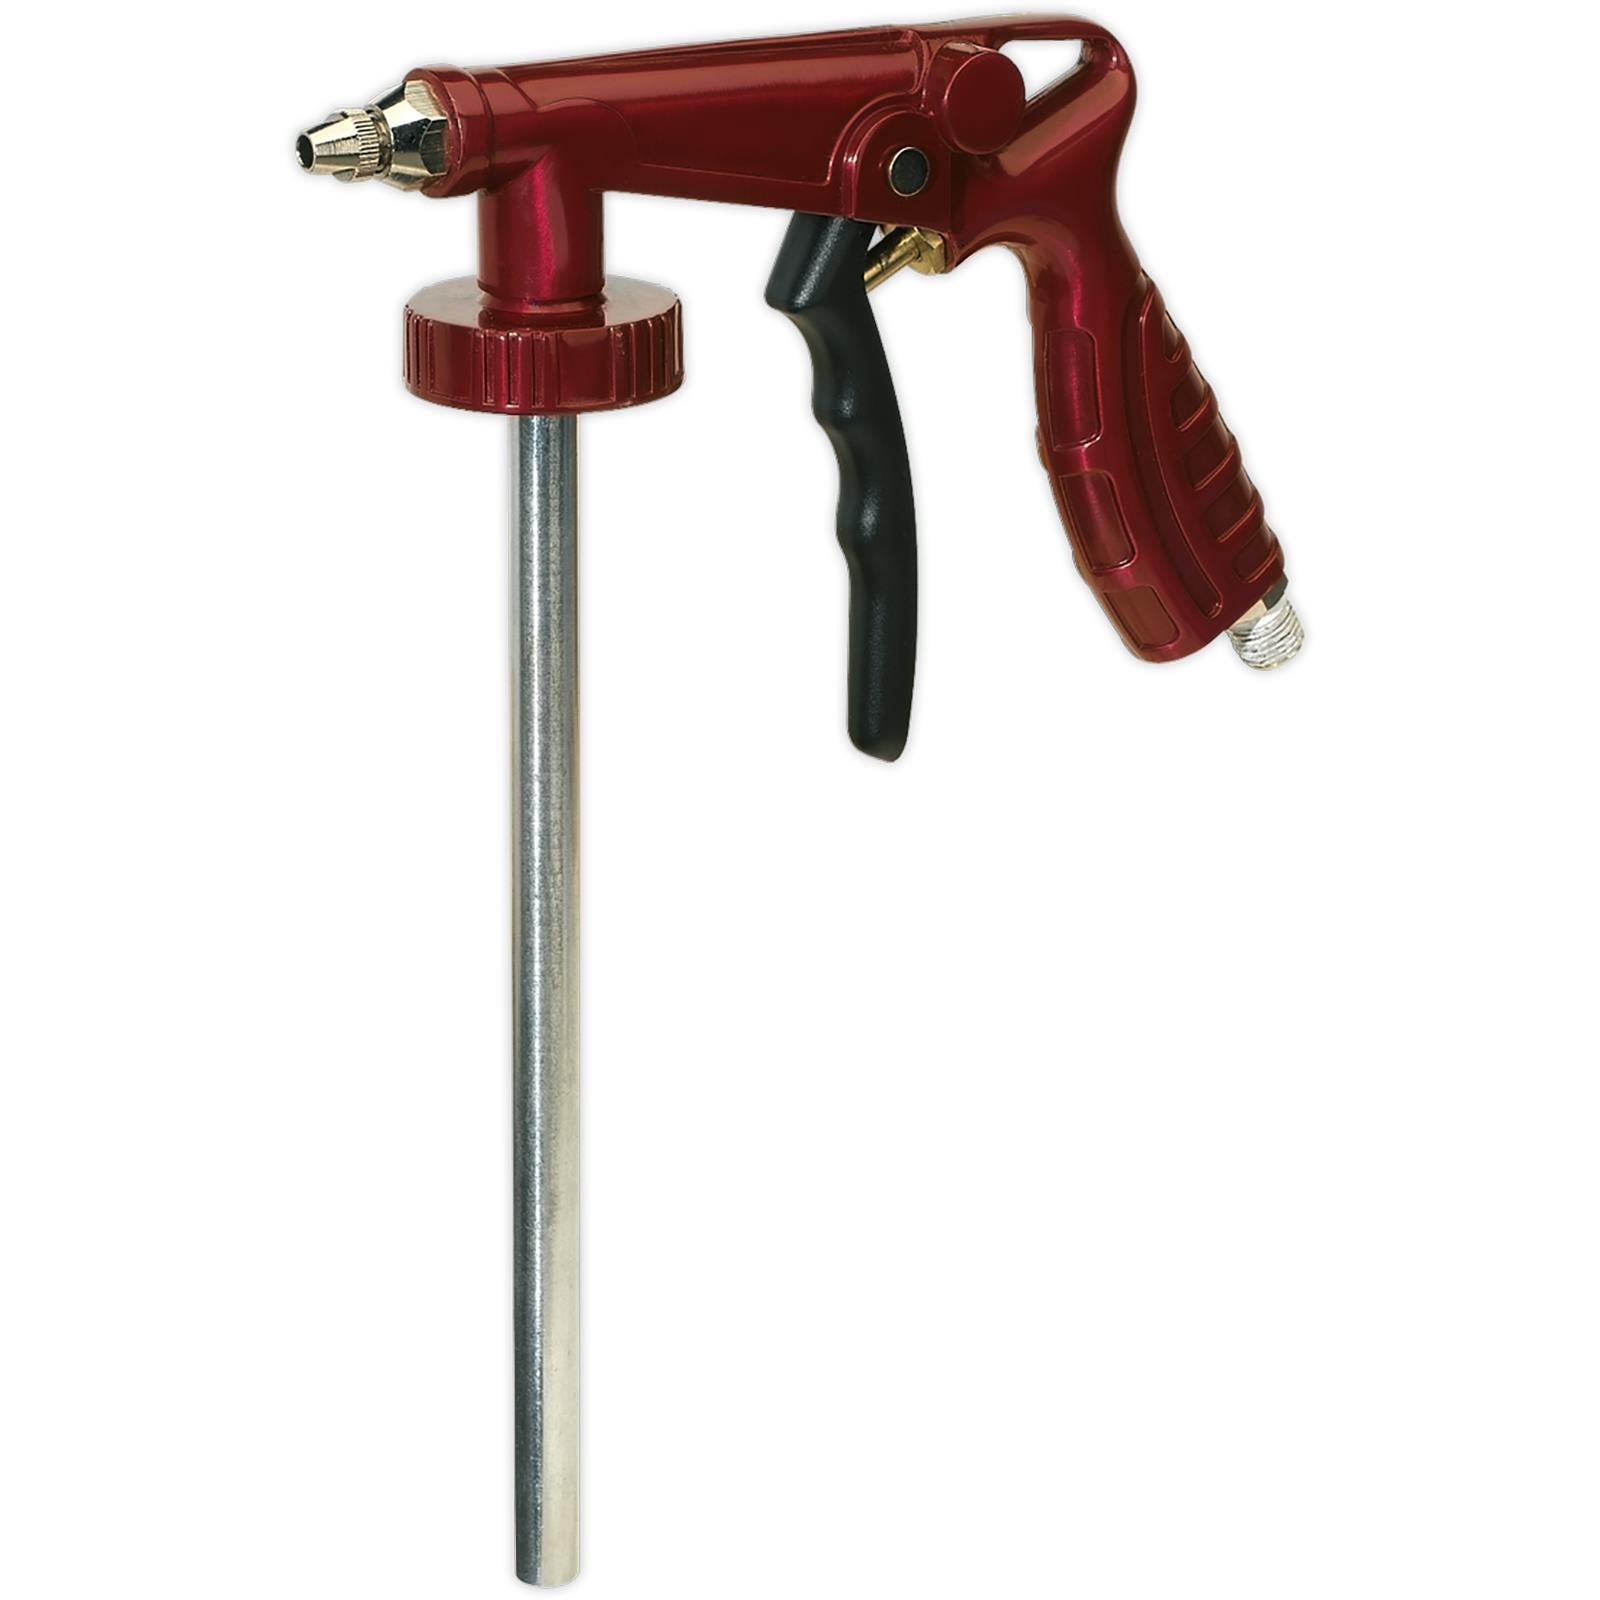 Sealey Air Operated Underbody Coating Gun 1/4" BSP with Flexible Hose